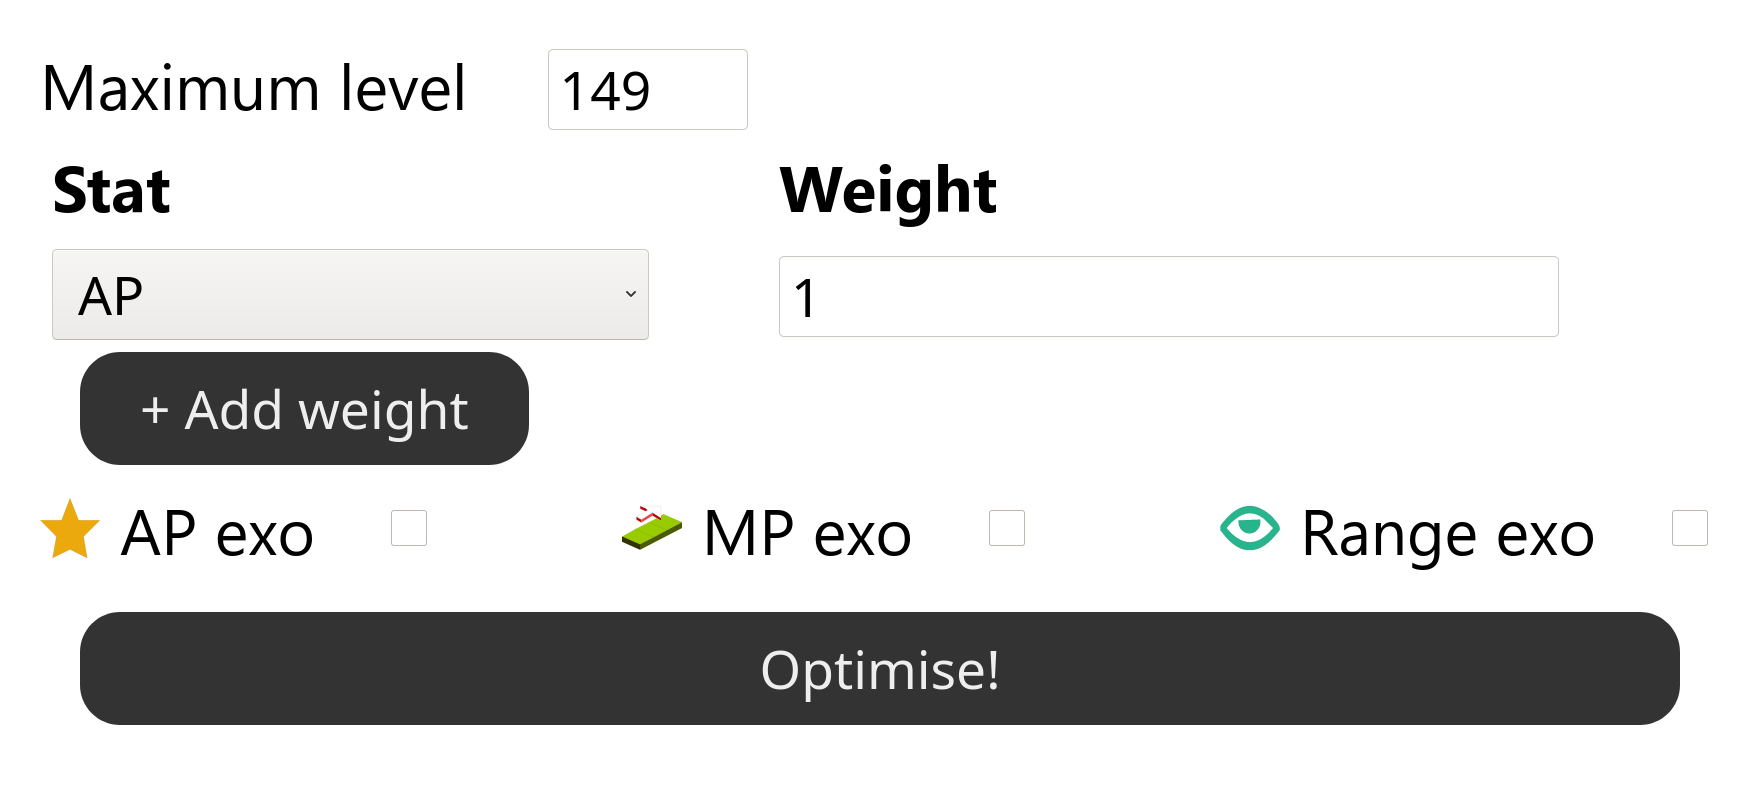 Displaying from top to bottom, left to right. Maximum level: 149. Stat, Weight. AP: 1. + Add weight. Ap exo, MP exo, Range Exo. Optimise!.